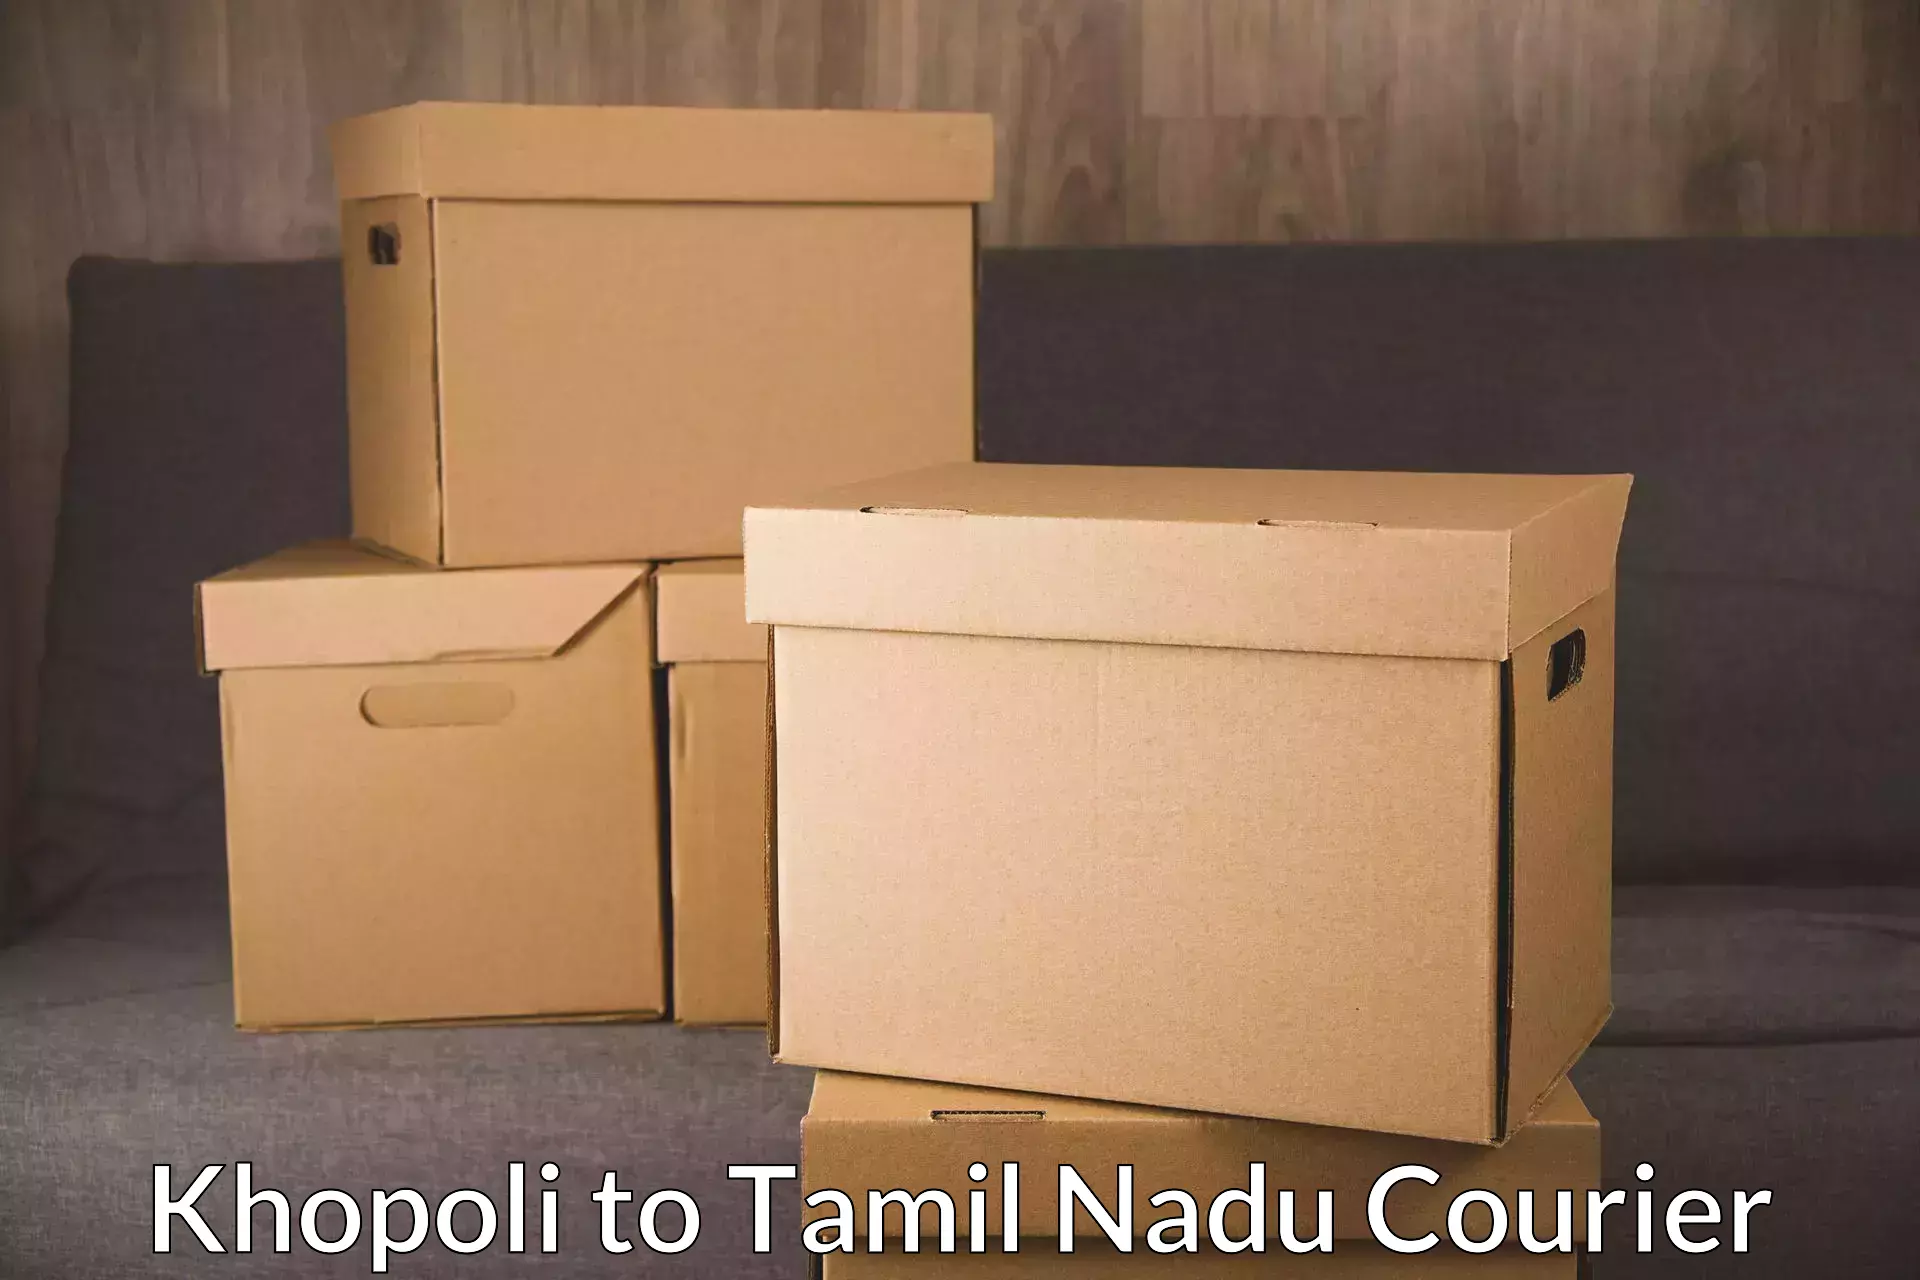 Courier service efficiency in Khopoli to Ennore Port Chennai